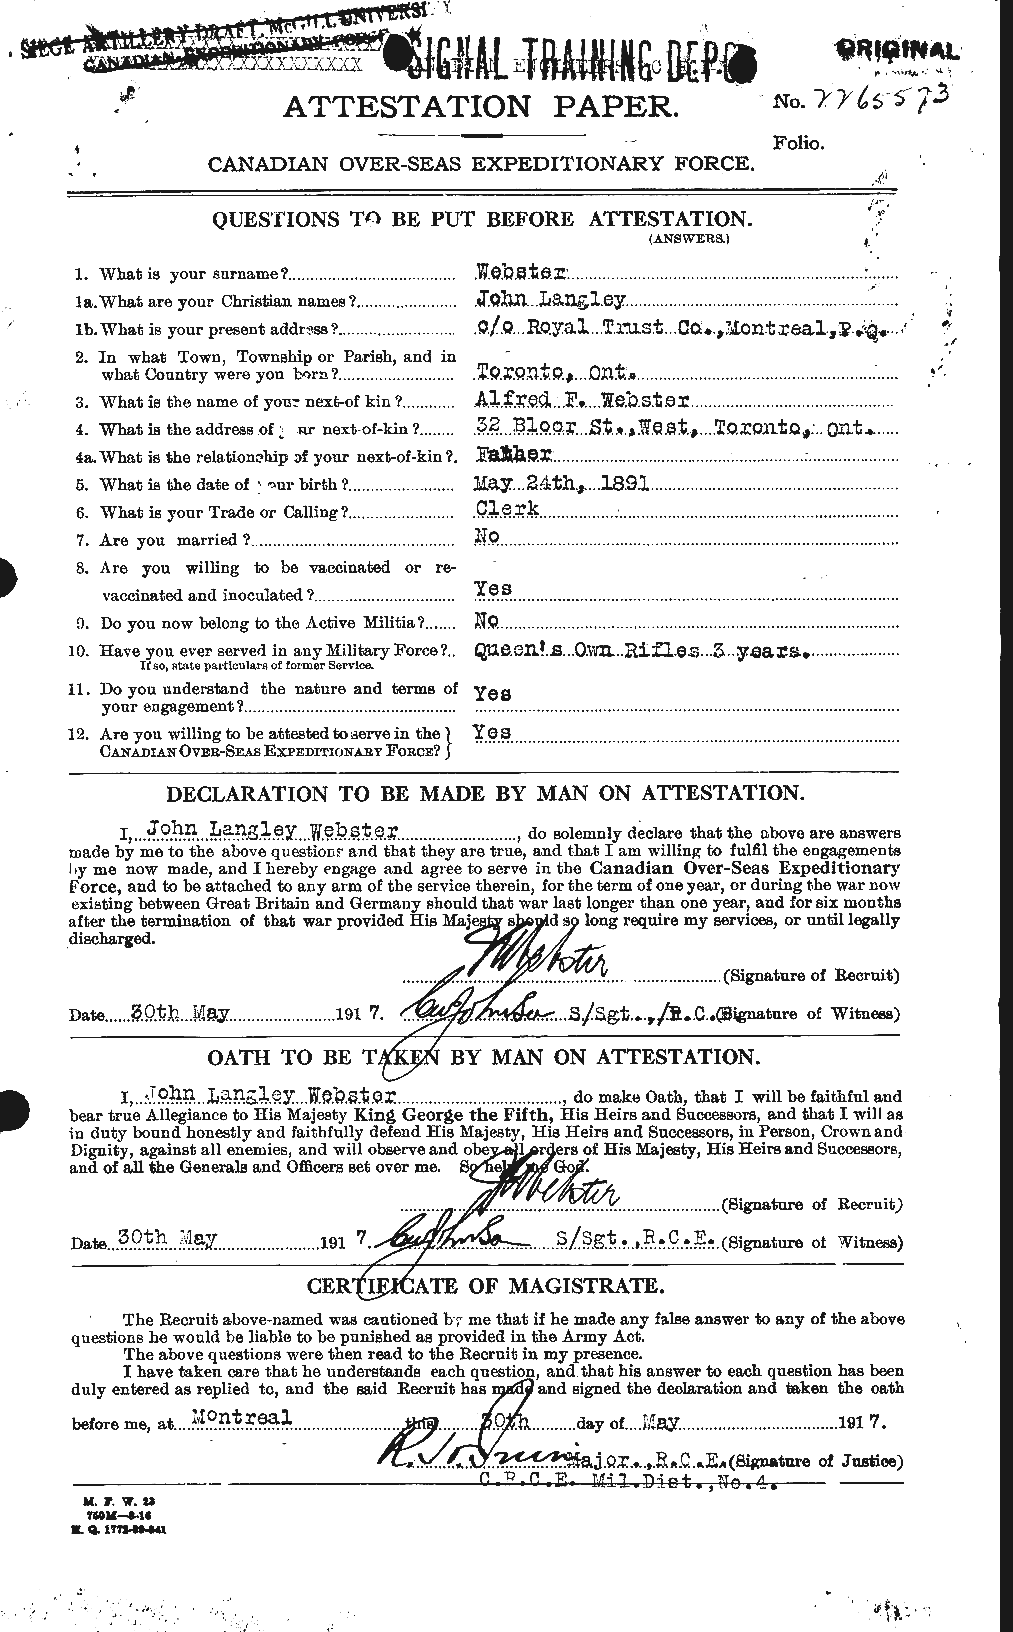 Personnel Records of the First World War - CEF 670489a